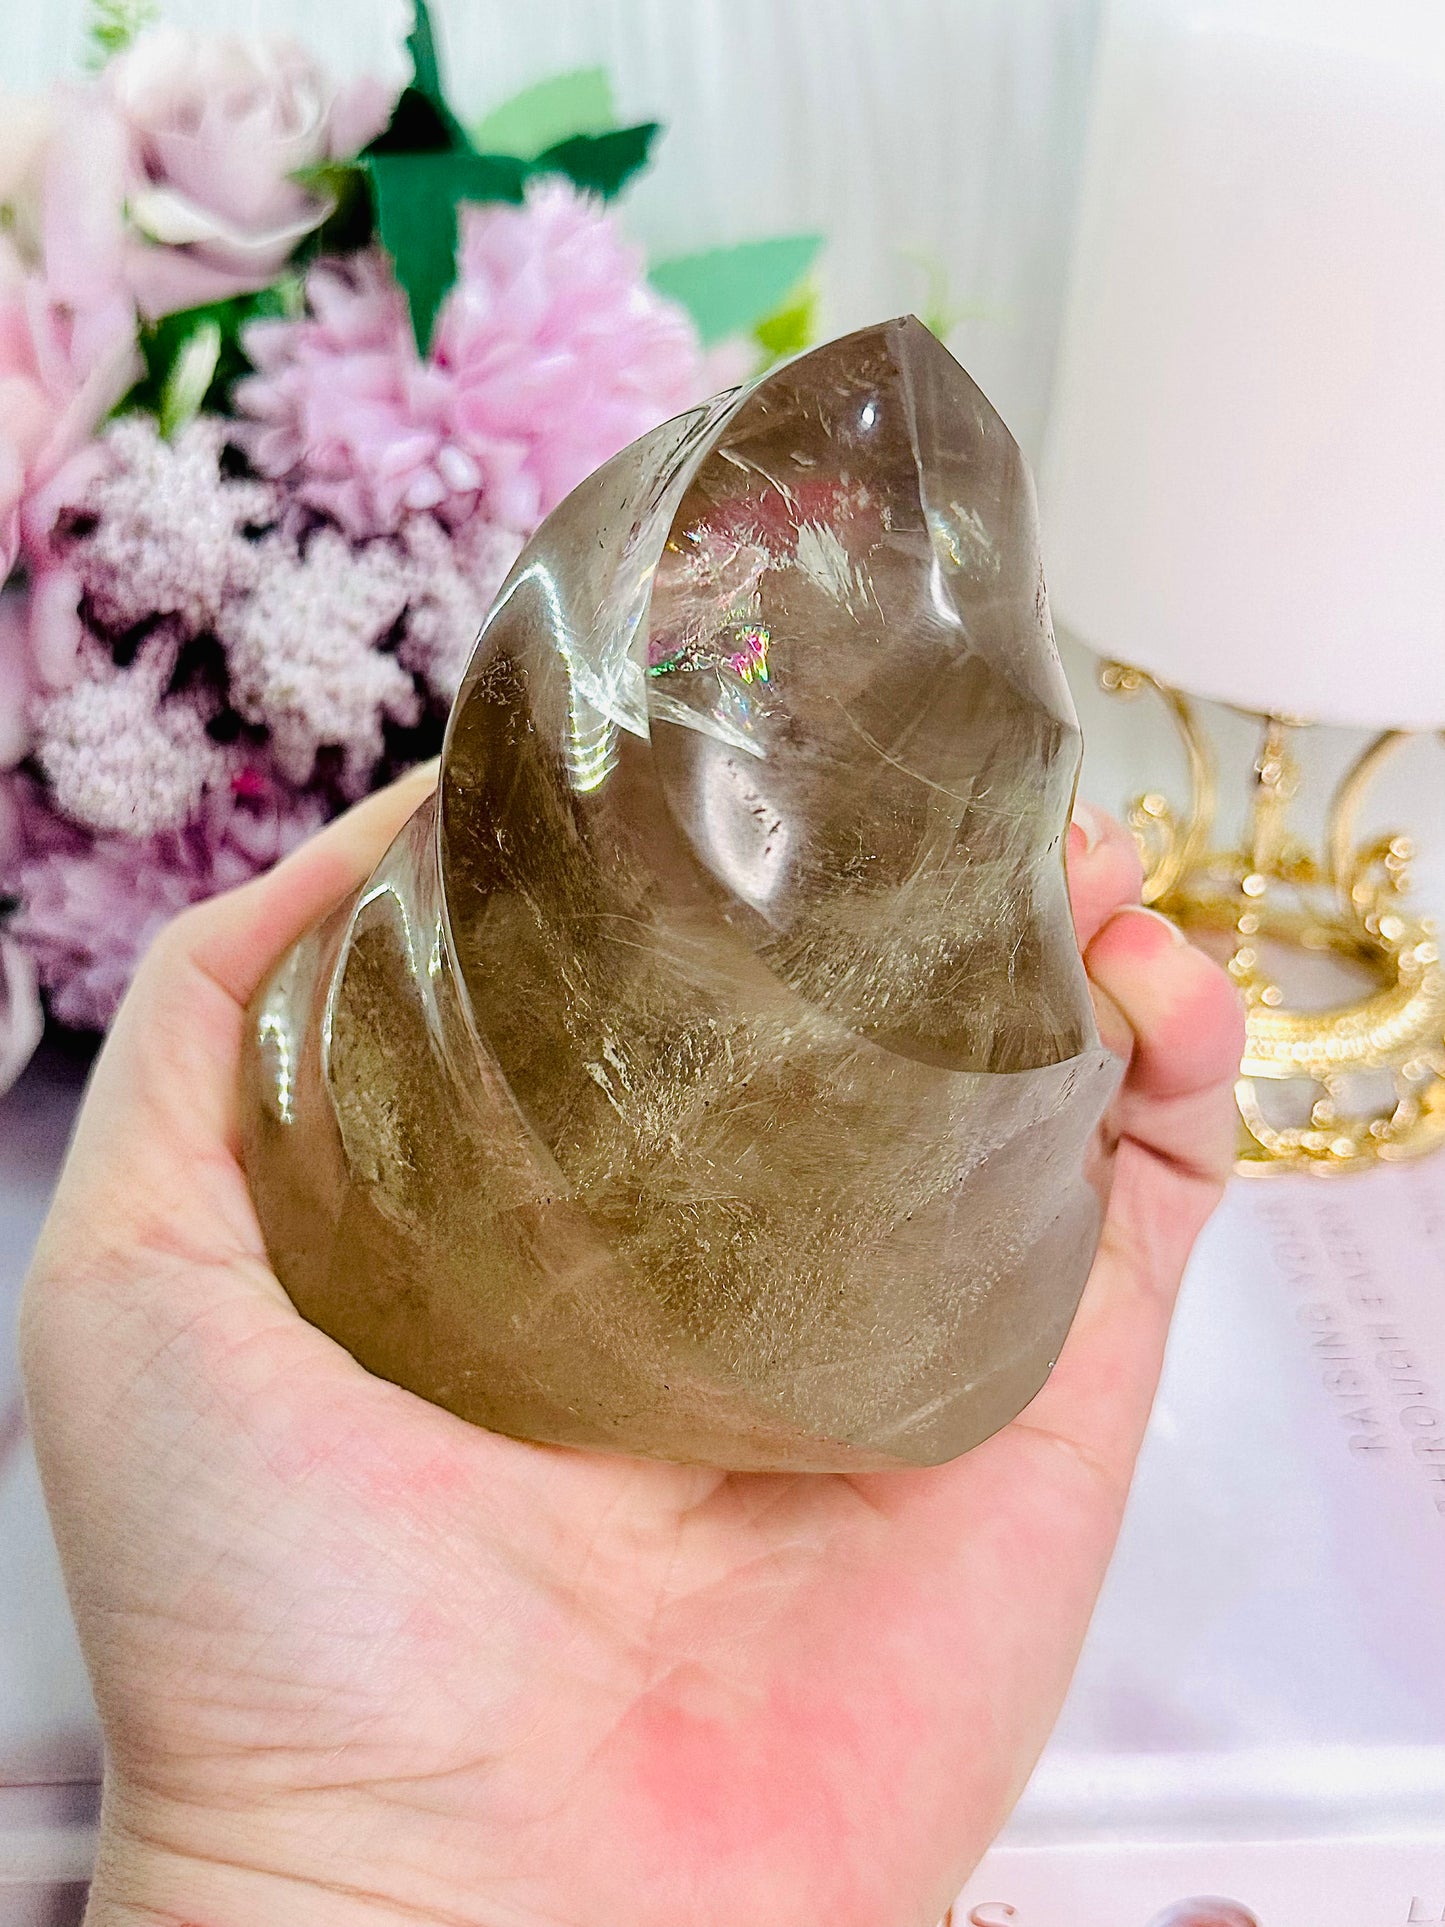 Supports Anxiety & Depression ~ Absolutely Incredible 554gram Smokey Quartz Flame From Brazil with Rainbows